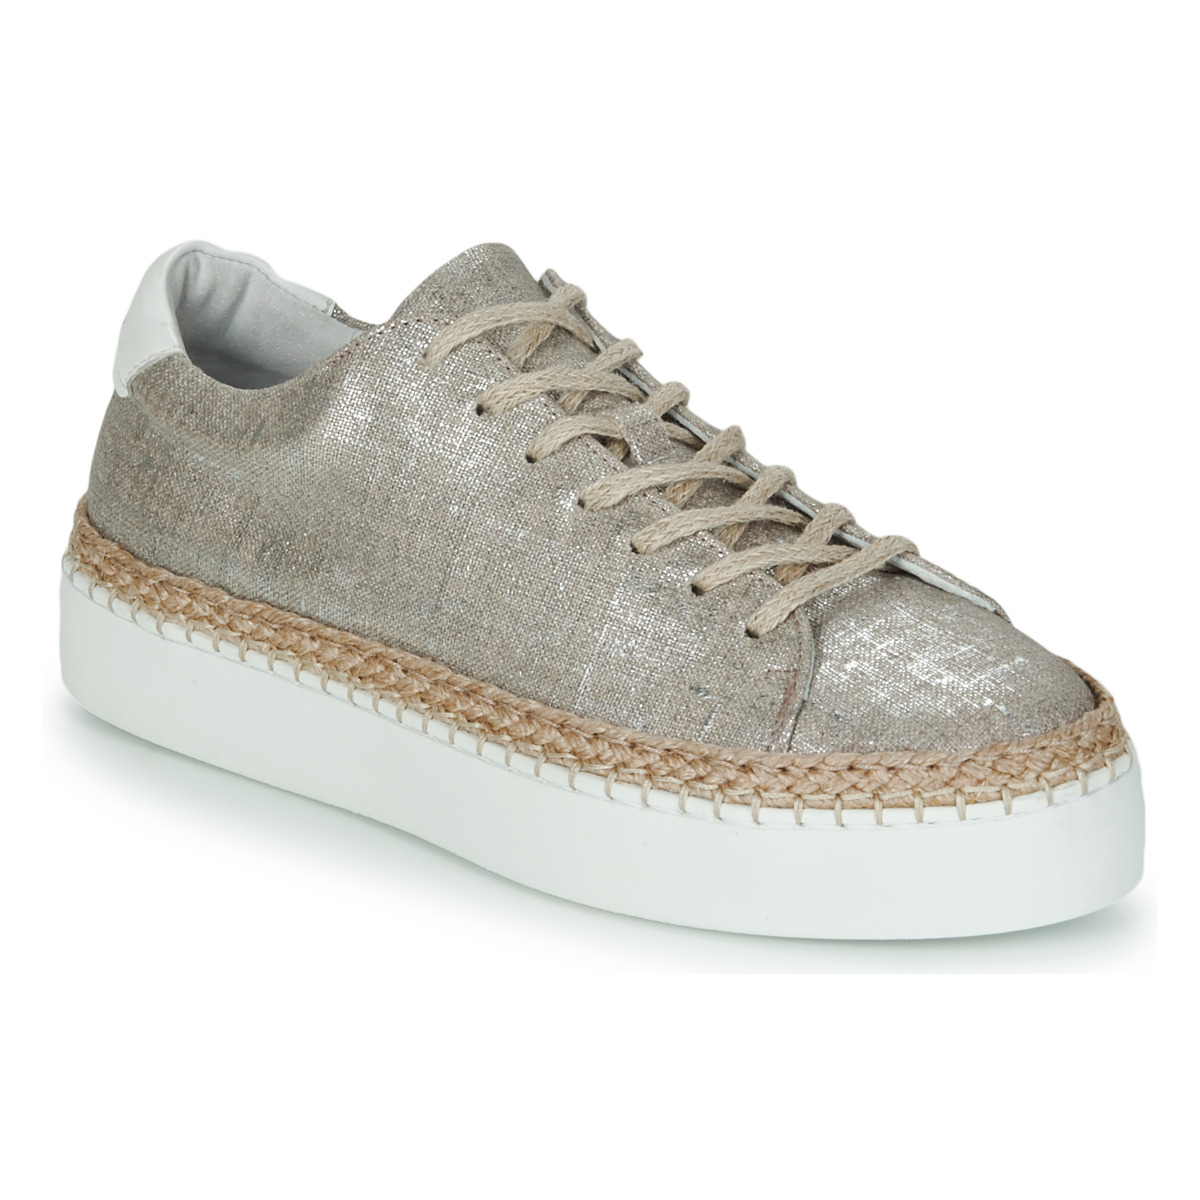 Shoes Women Low top trainers Pataugas SELLA/T Silver